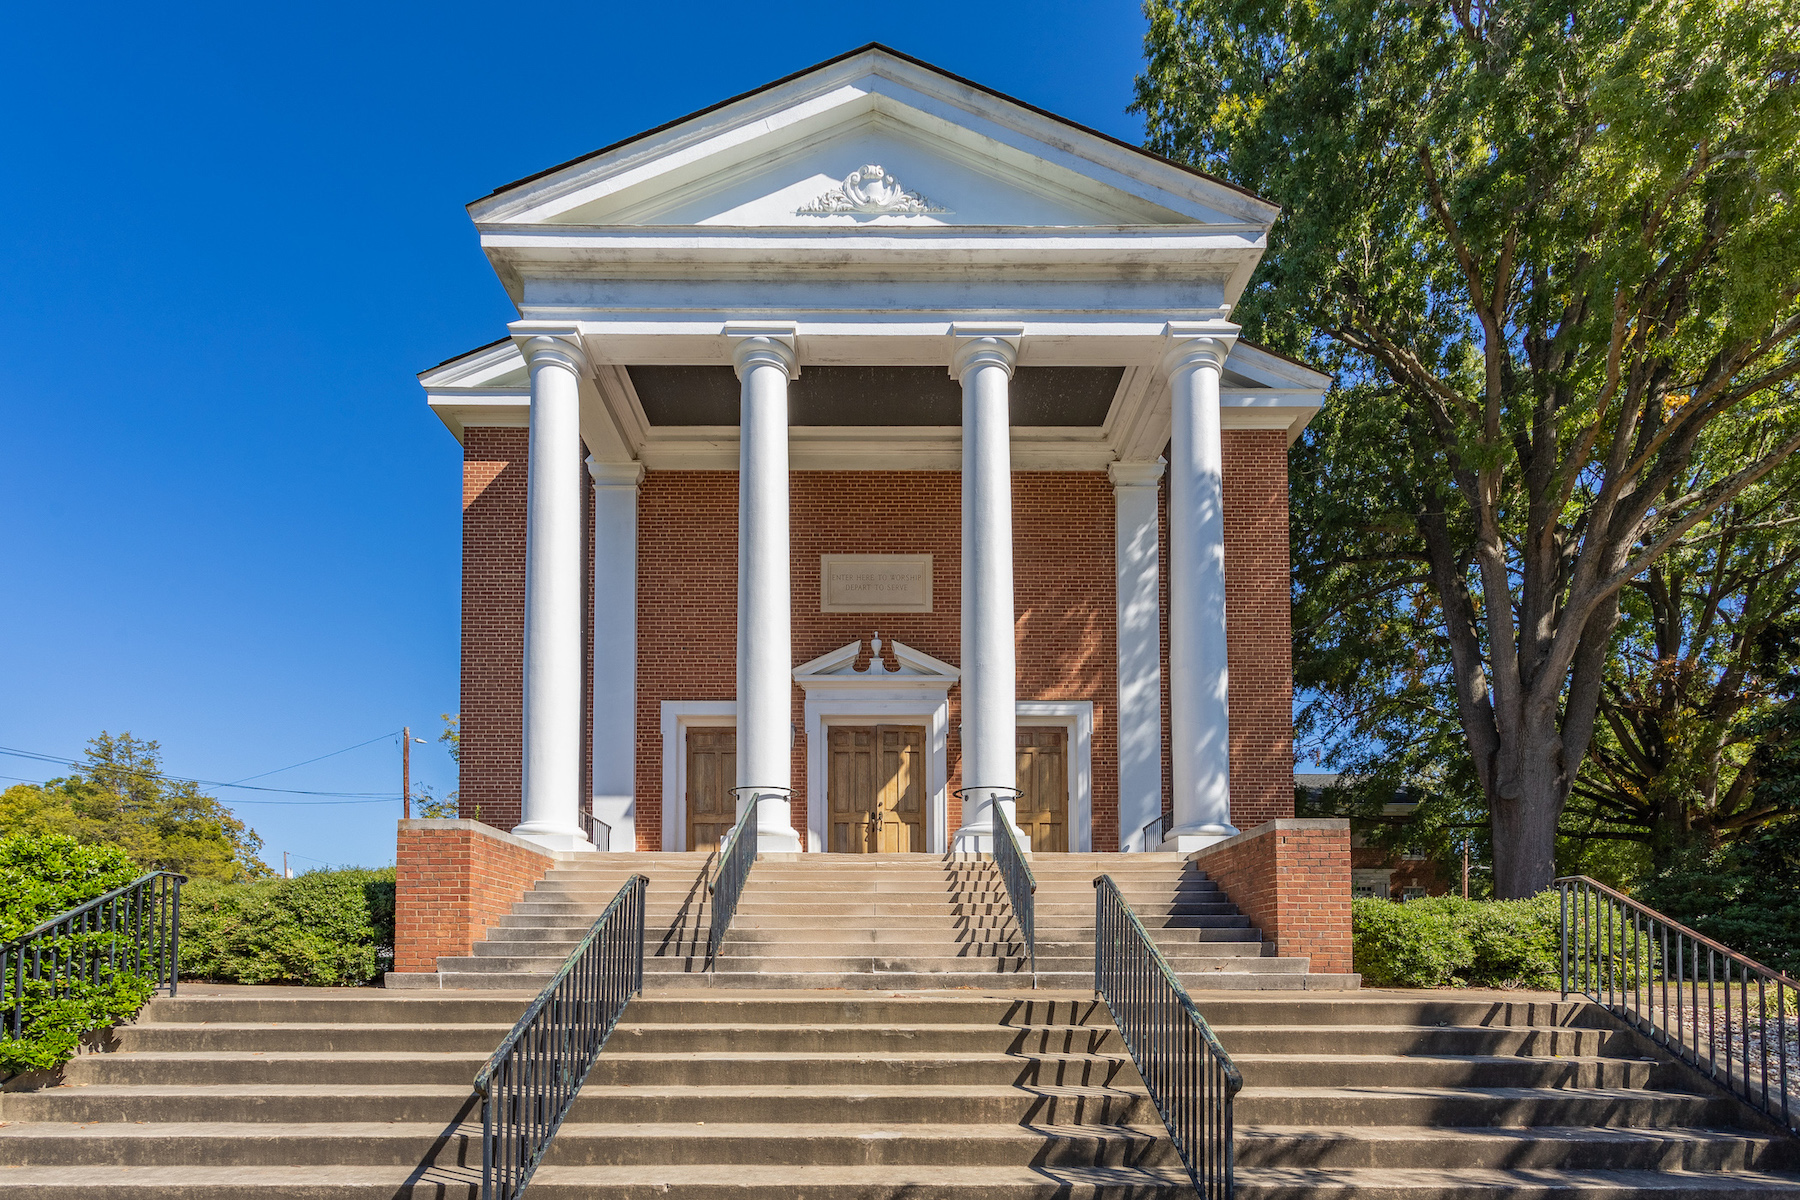 Photo of the front of Davis Street UMC, a large brick church with four white columns in the front.